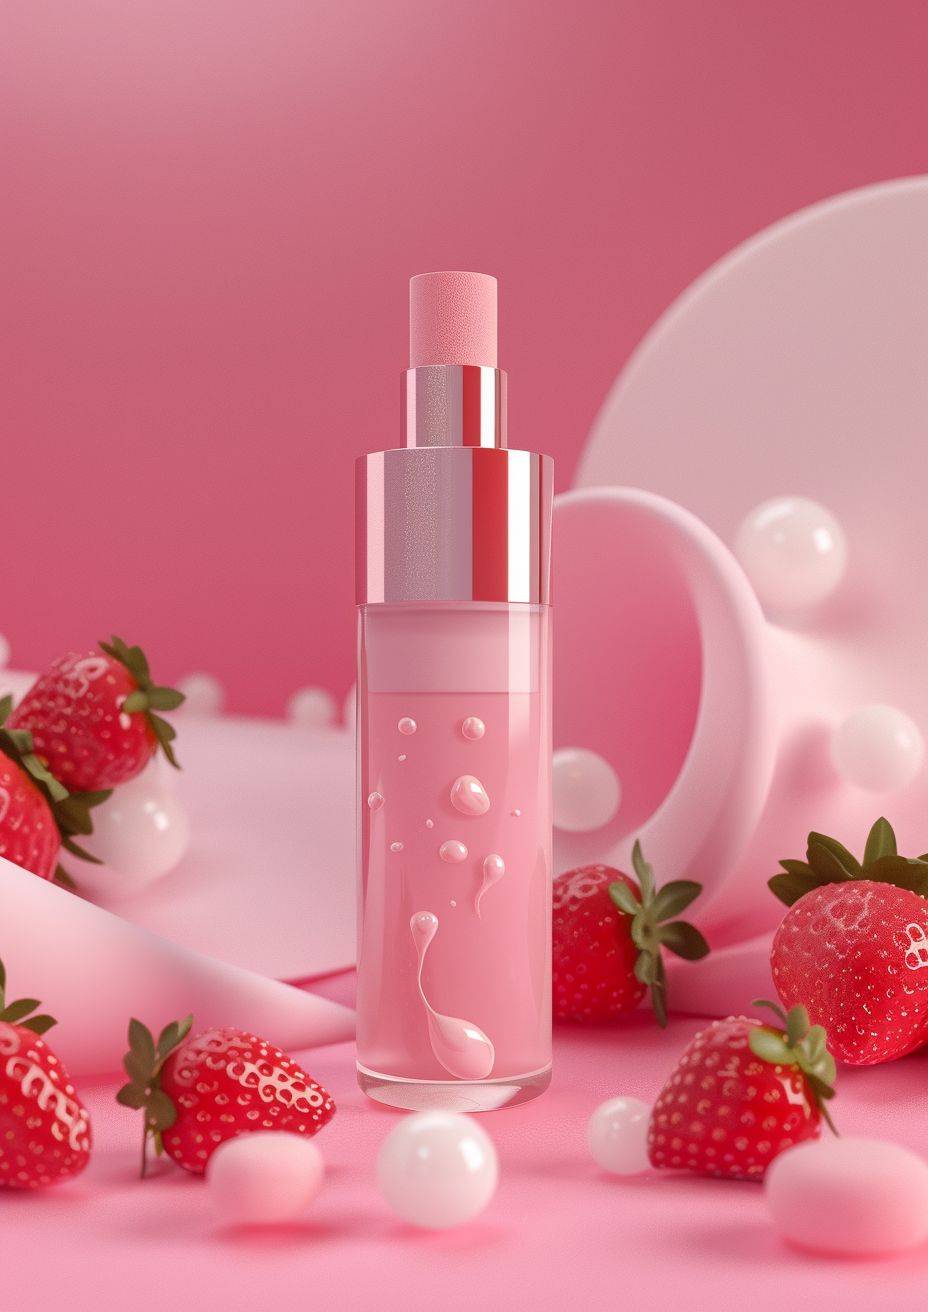 Bottle of cosmetics high end poster background light pink gradient colour background, strawberry, C4D render HD 12K.